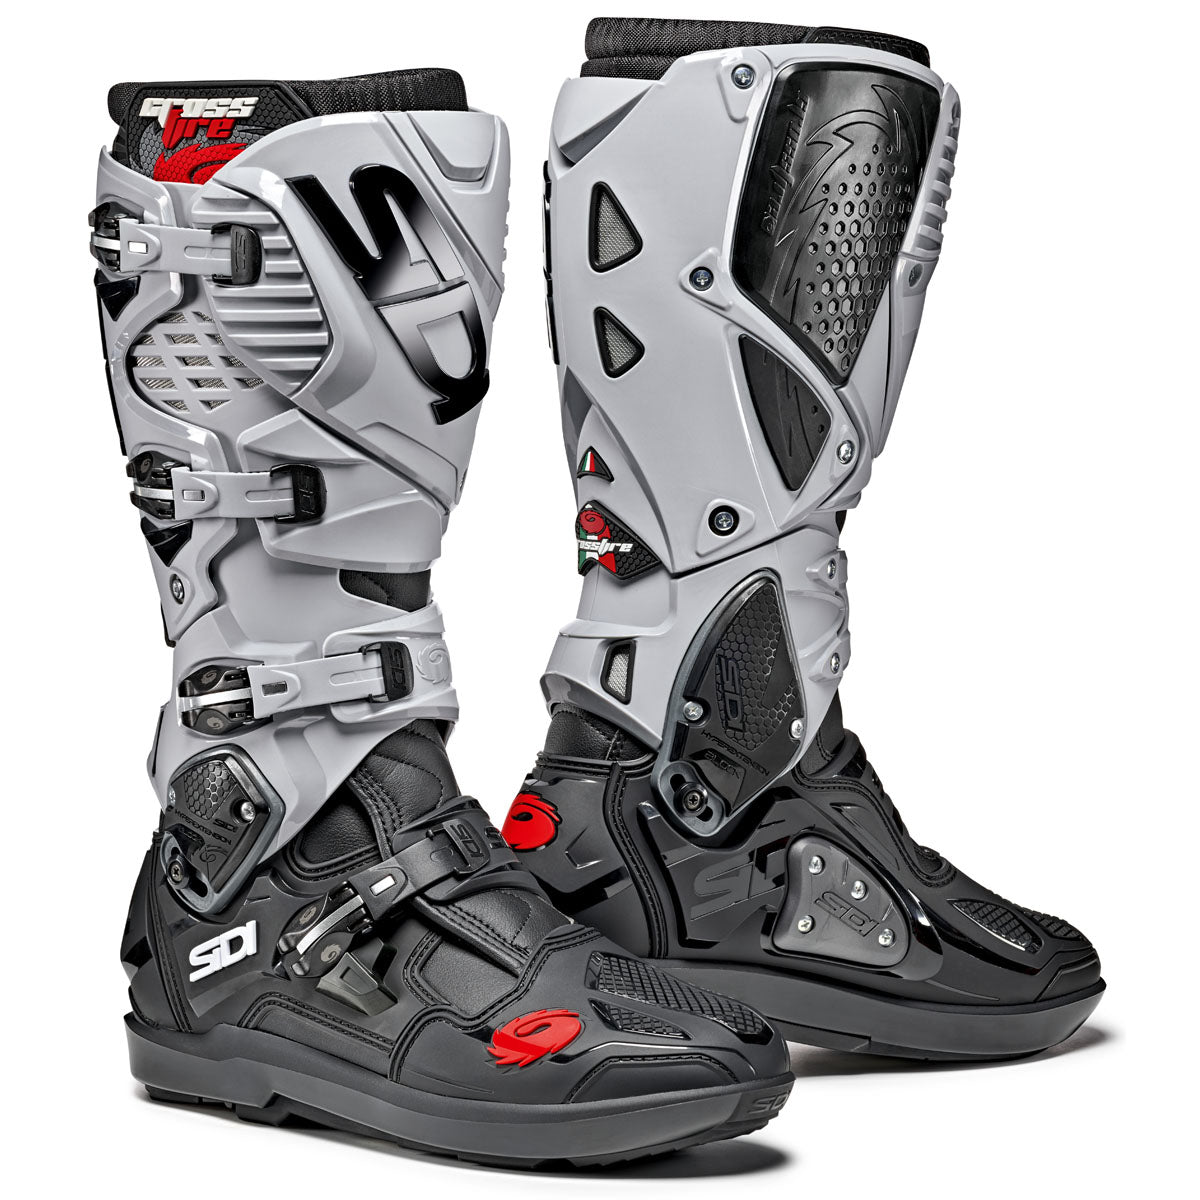 Sidi Crossfire 3 SRS Off-Road Motorcycle Boots - Black/Ash